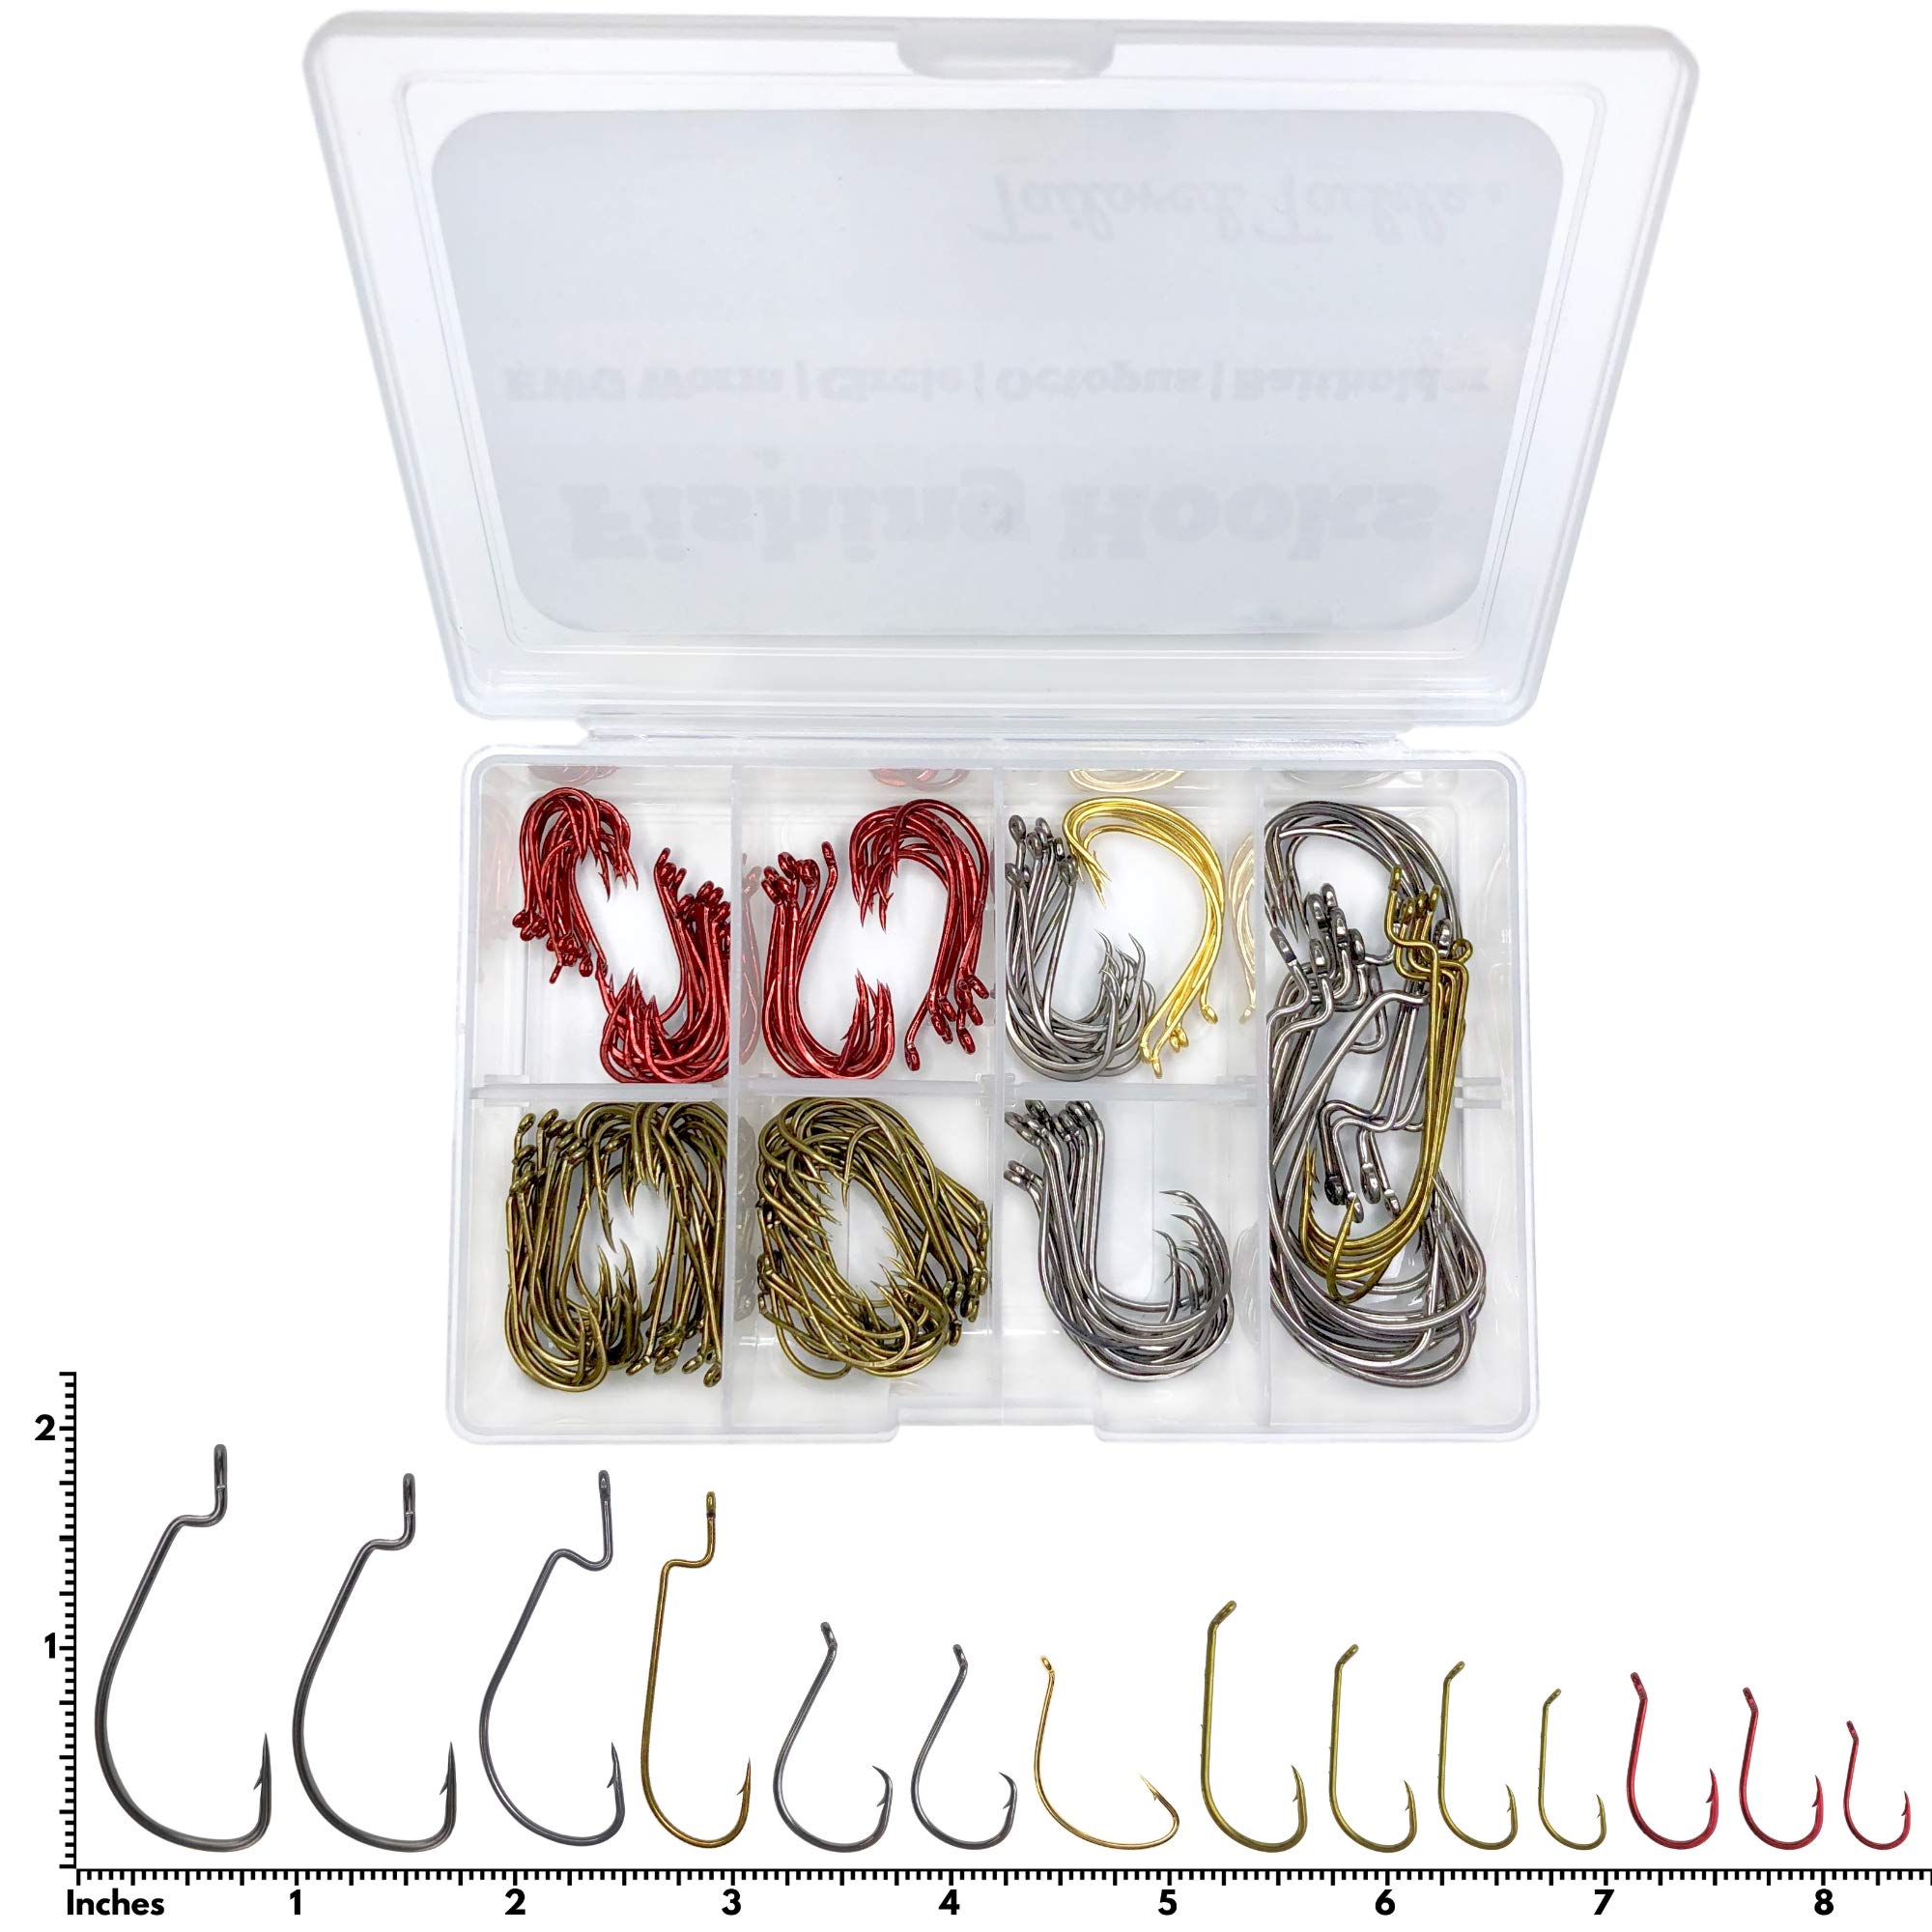 Tailored Tackle Fishing Hooks Kit 150 Pc Accessories Box | EWG Worm,  Octopus, Bait Holder, Circle Fish for Freshwater Bass Trout Catfish Panfish